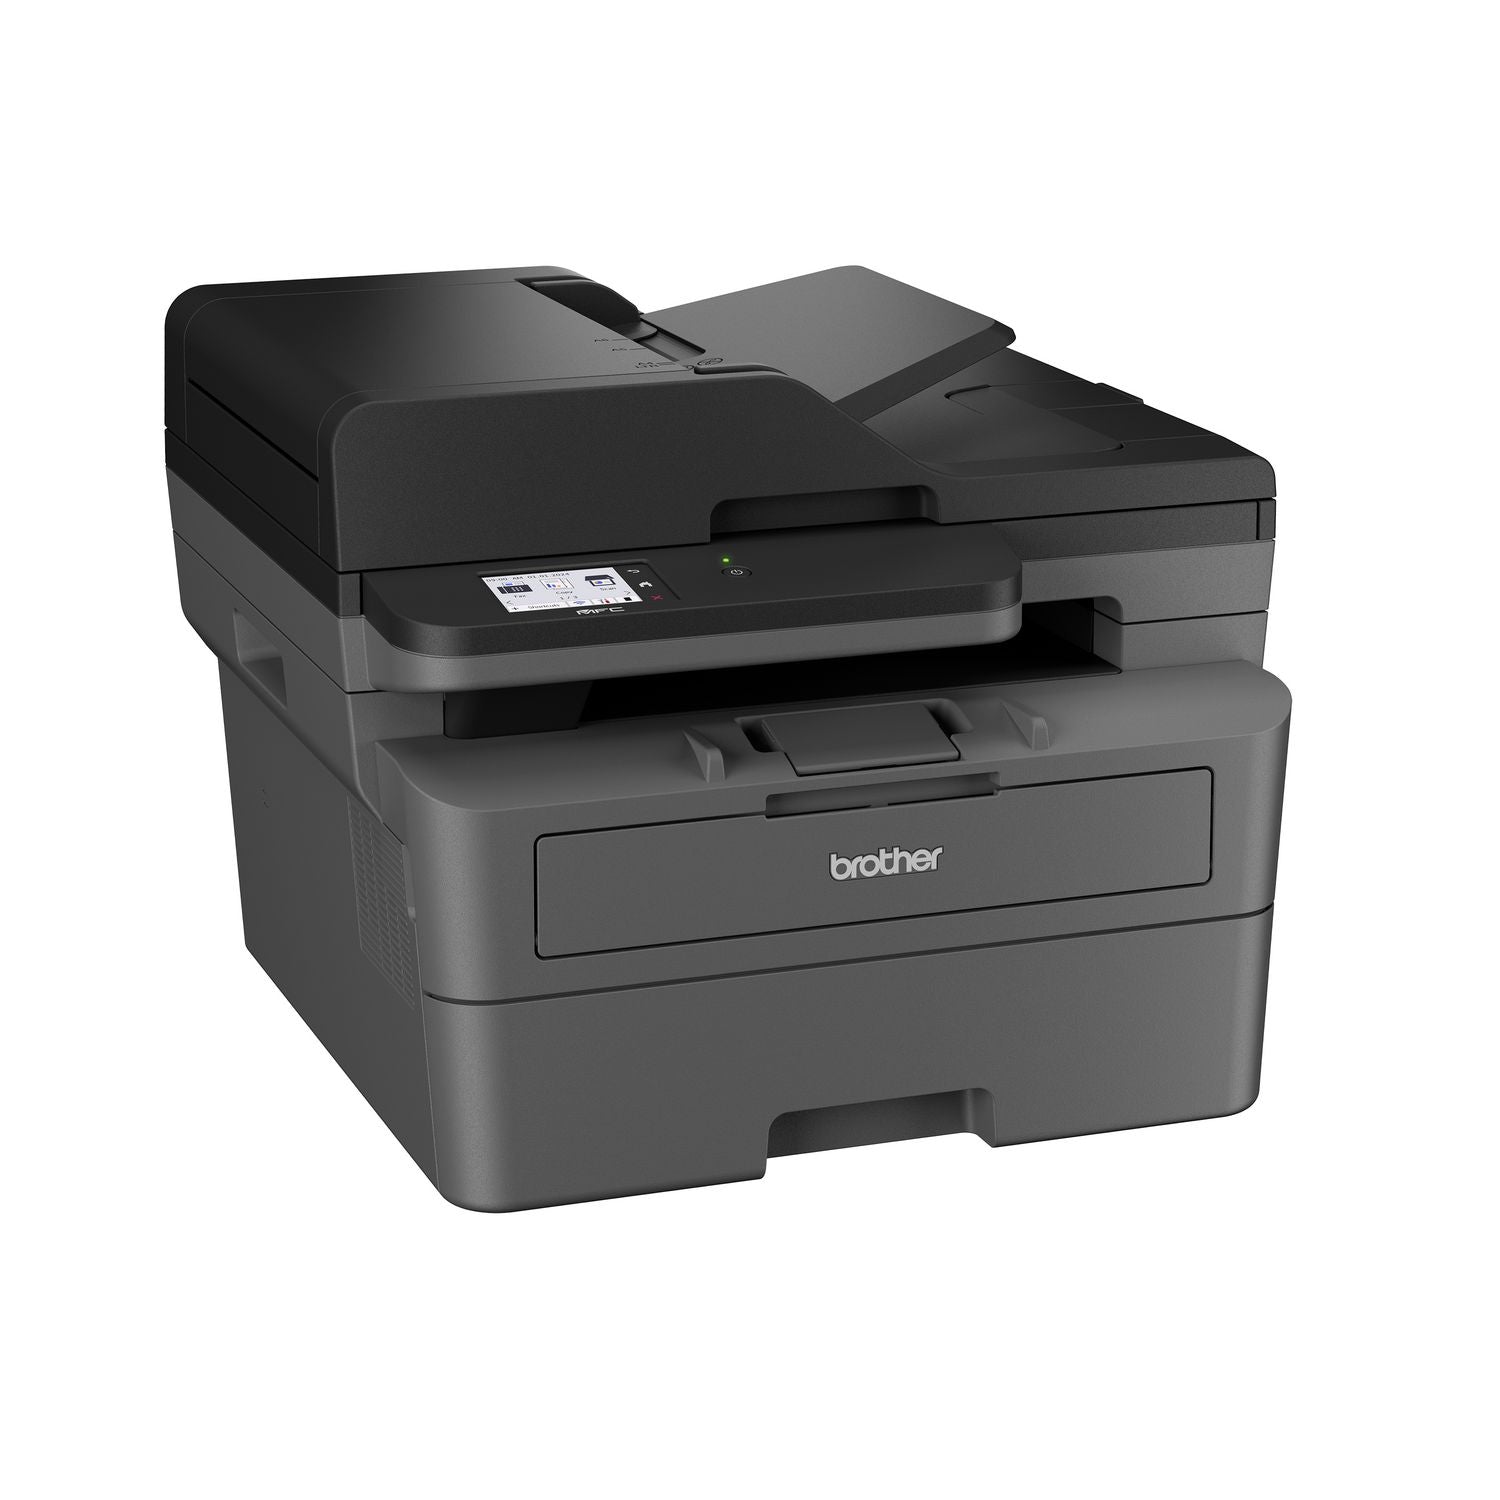 mfc-l2820dw-wireless-compact-monochrome-all-in-one-laser-printer-copy-fax-print-scan_brtmfcl2820dw - 4